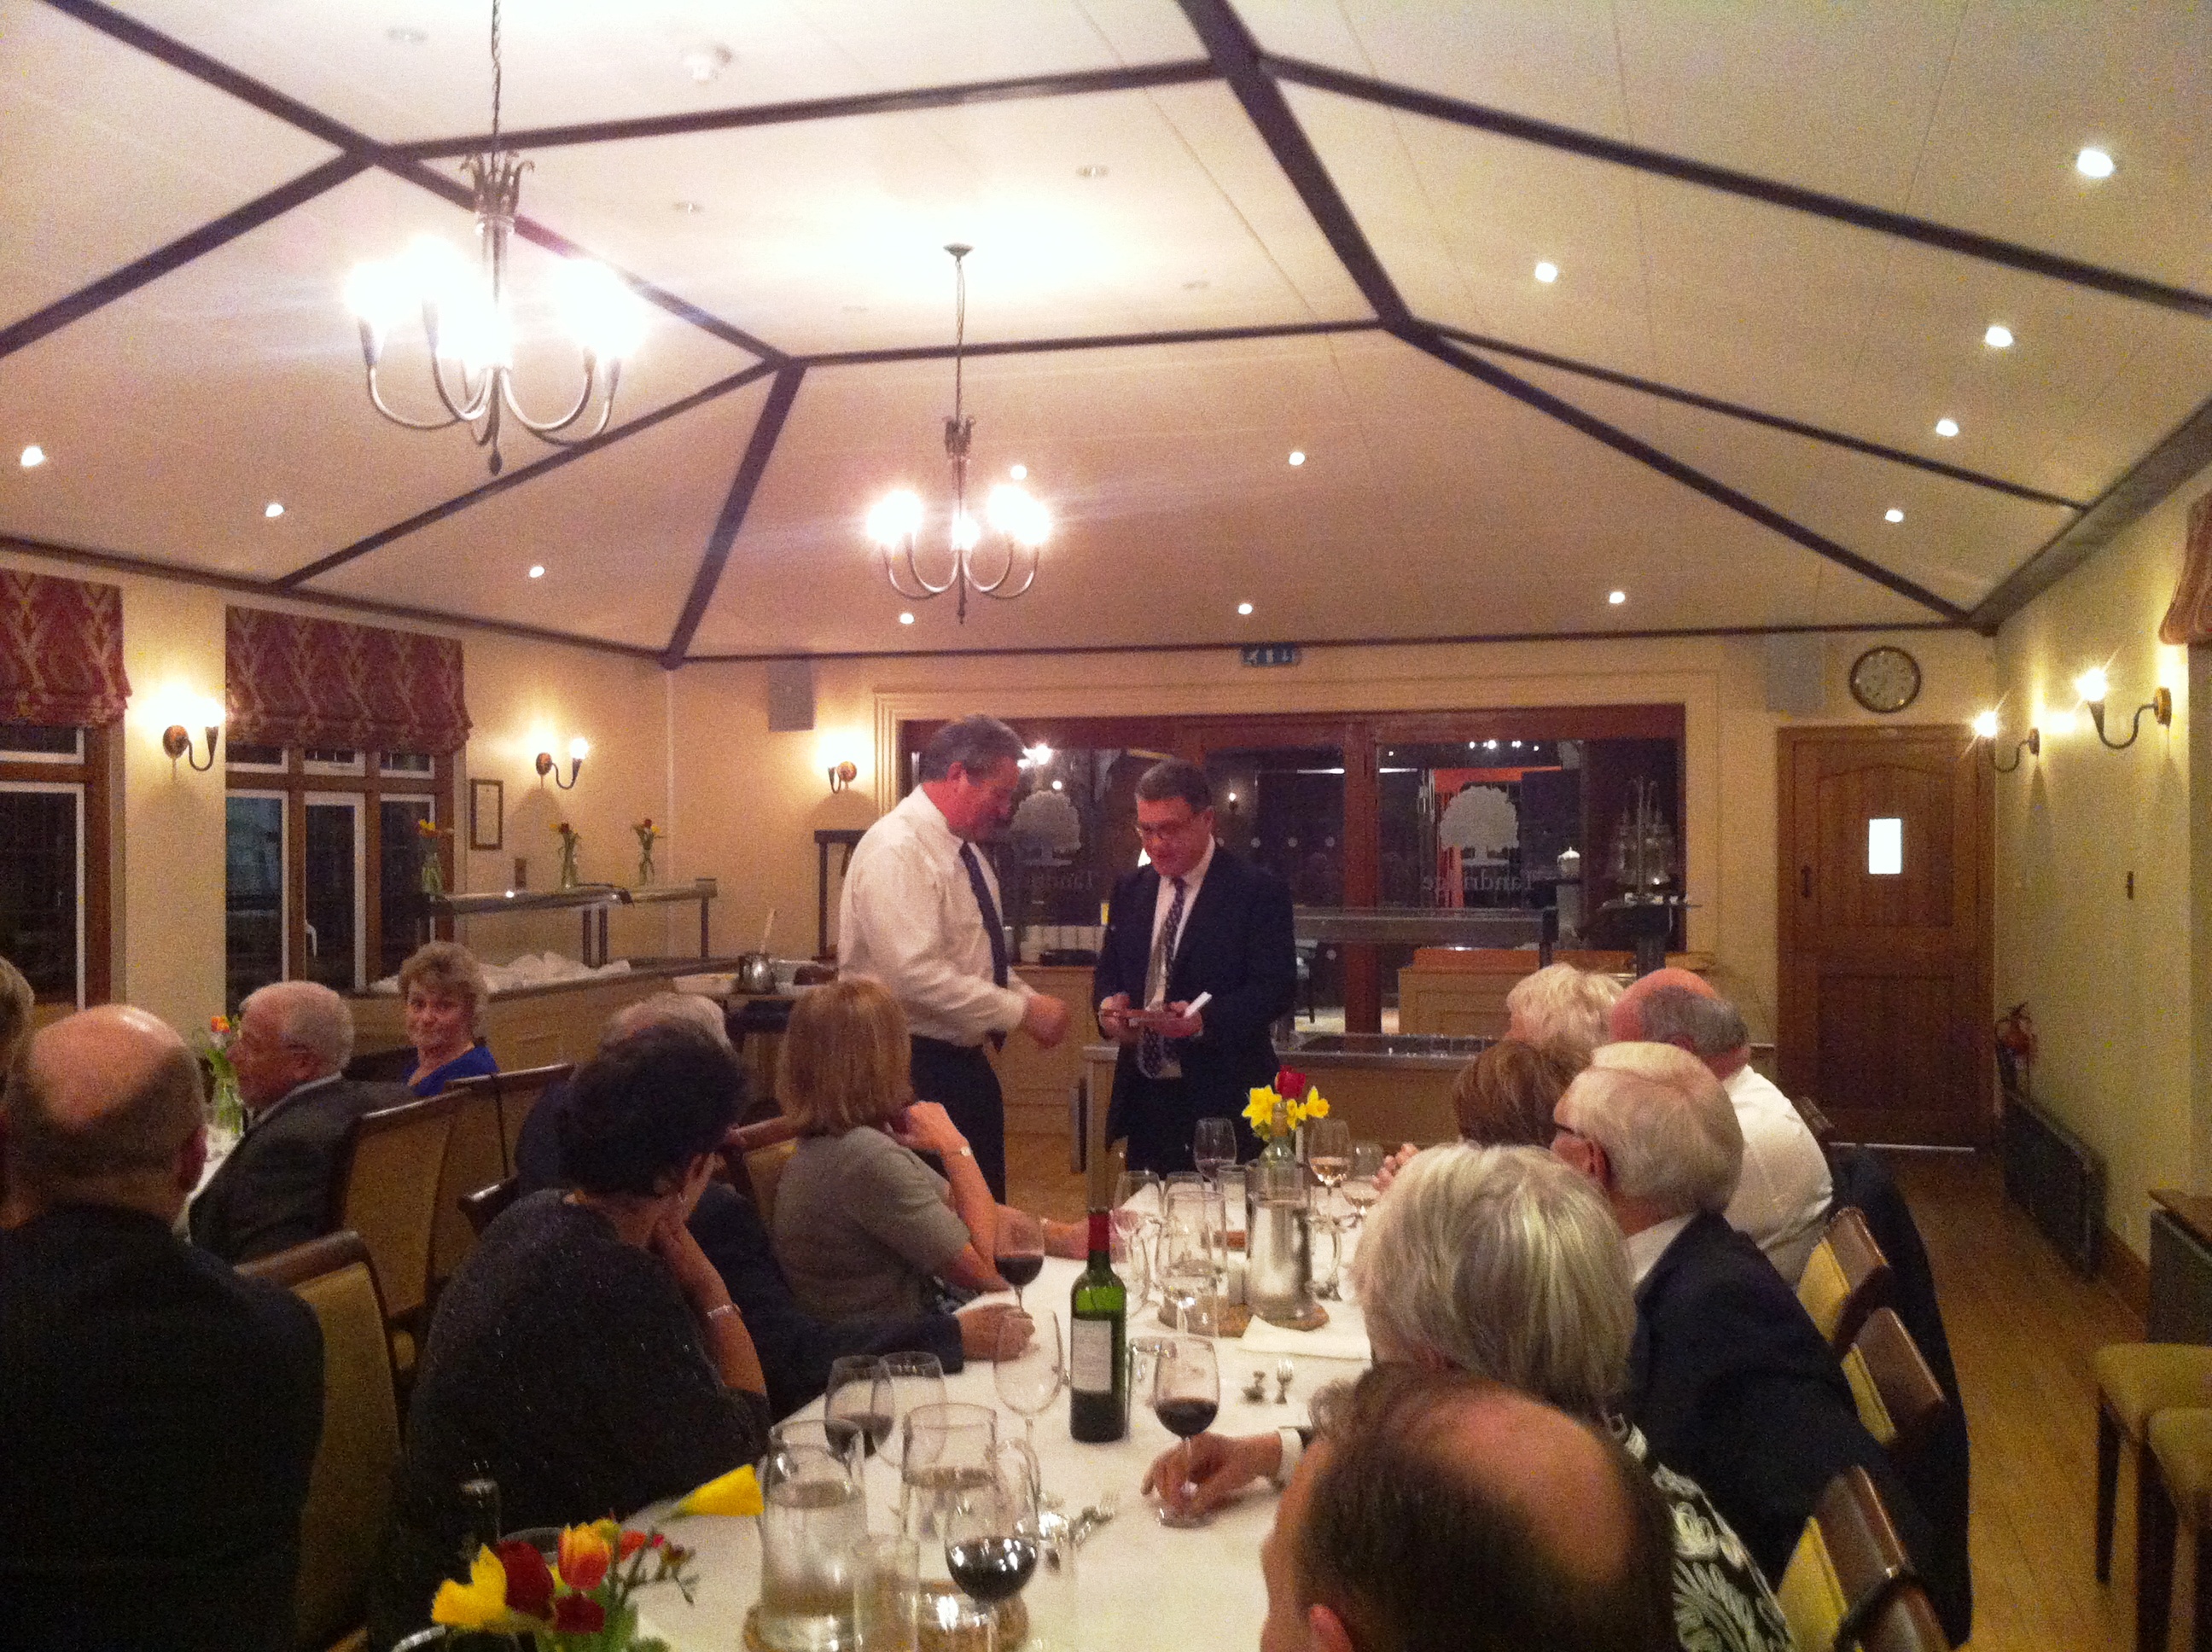 Jasper Awards the Spirit of Sailing Trophy to Paul May